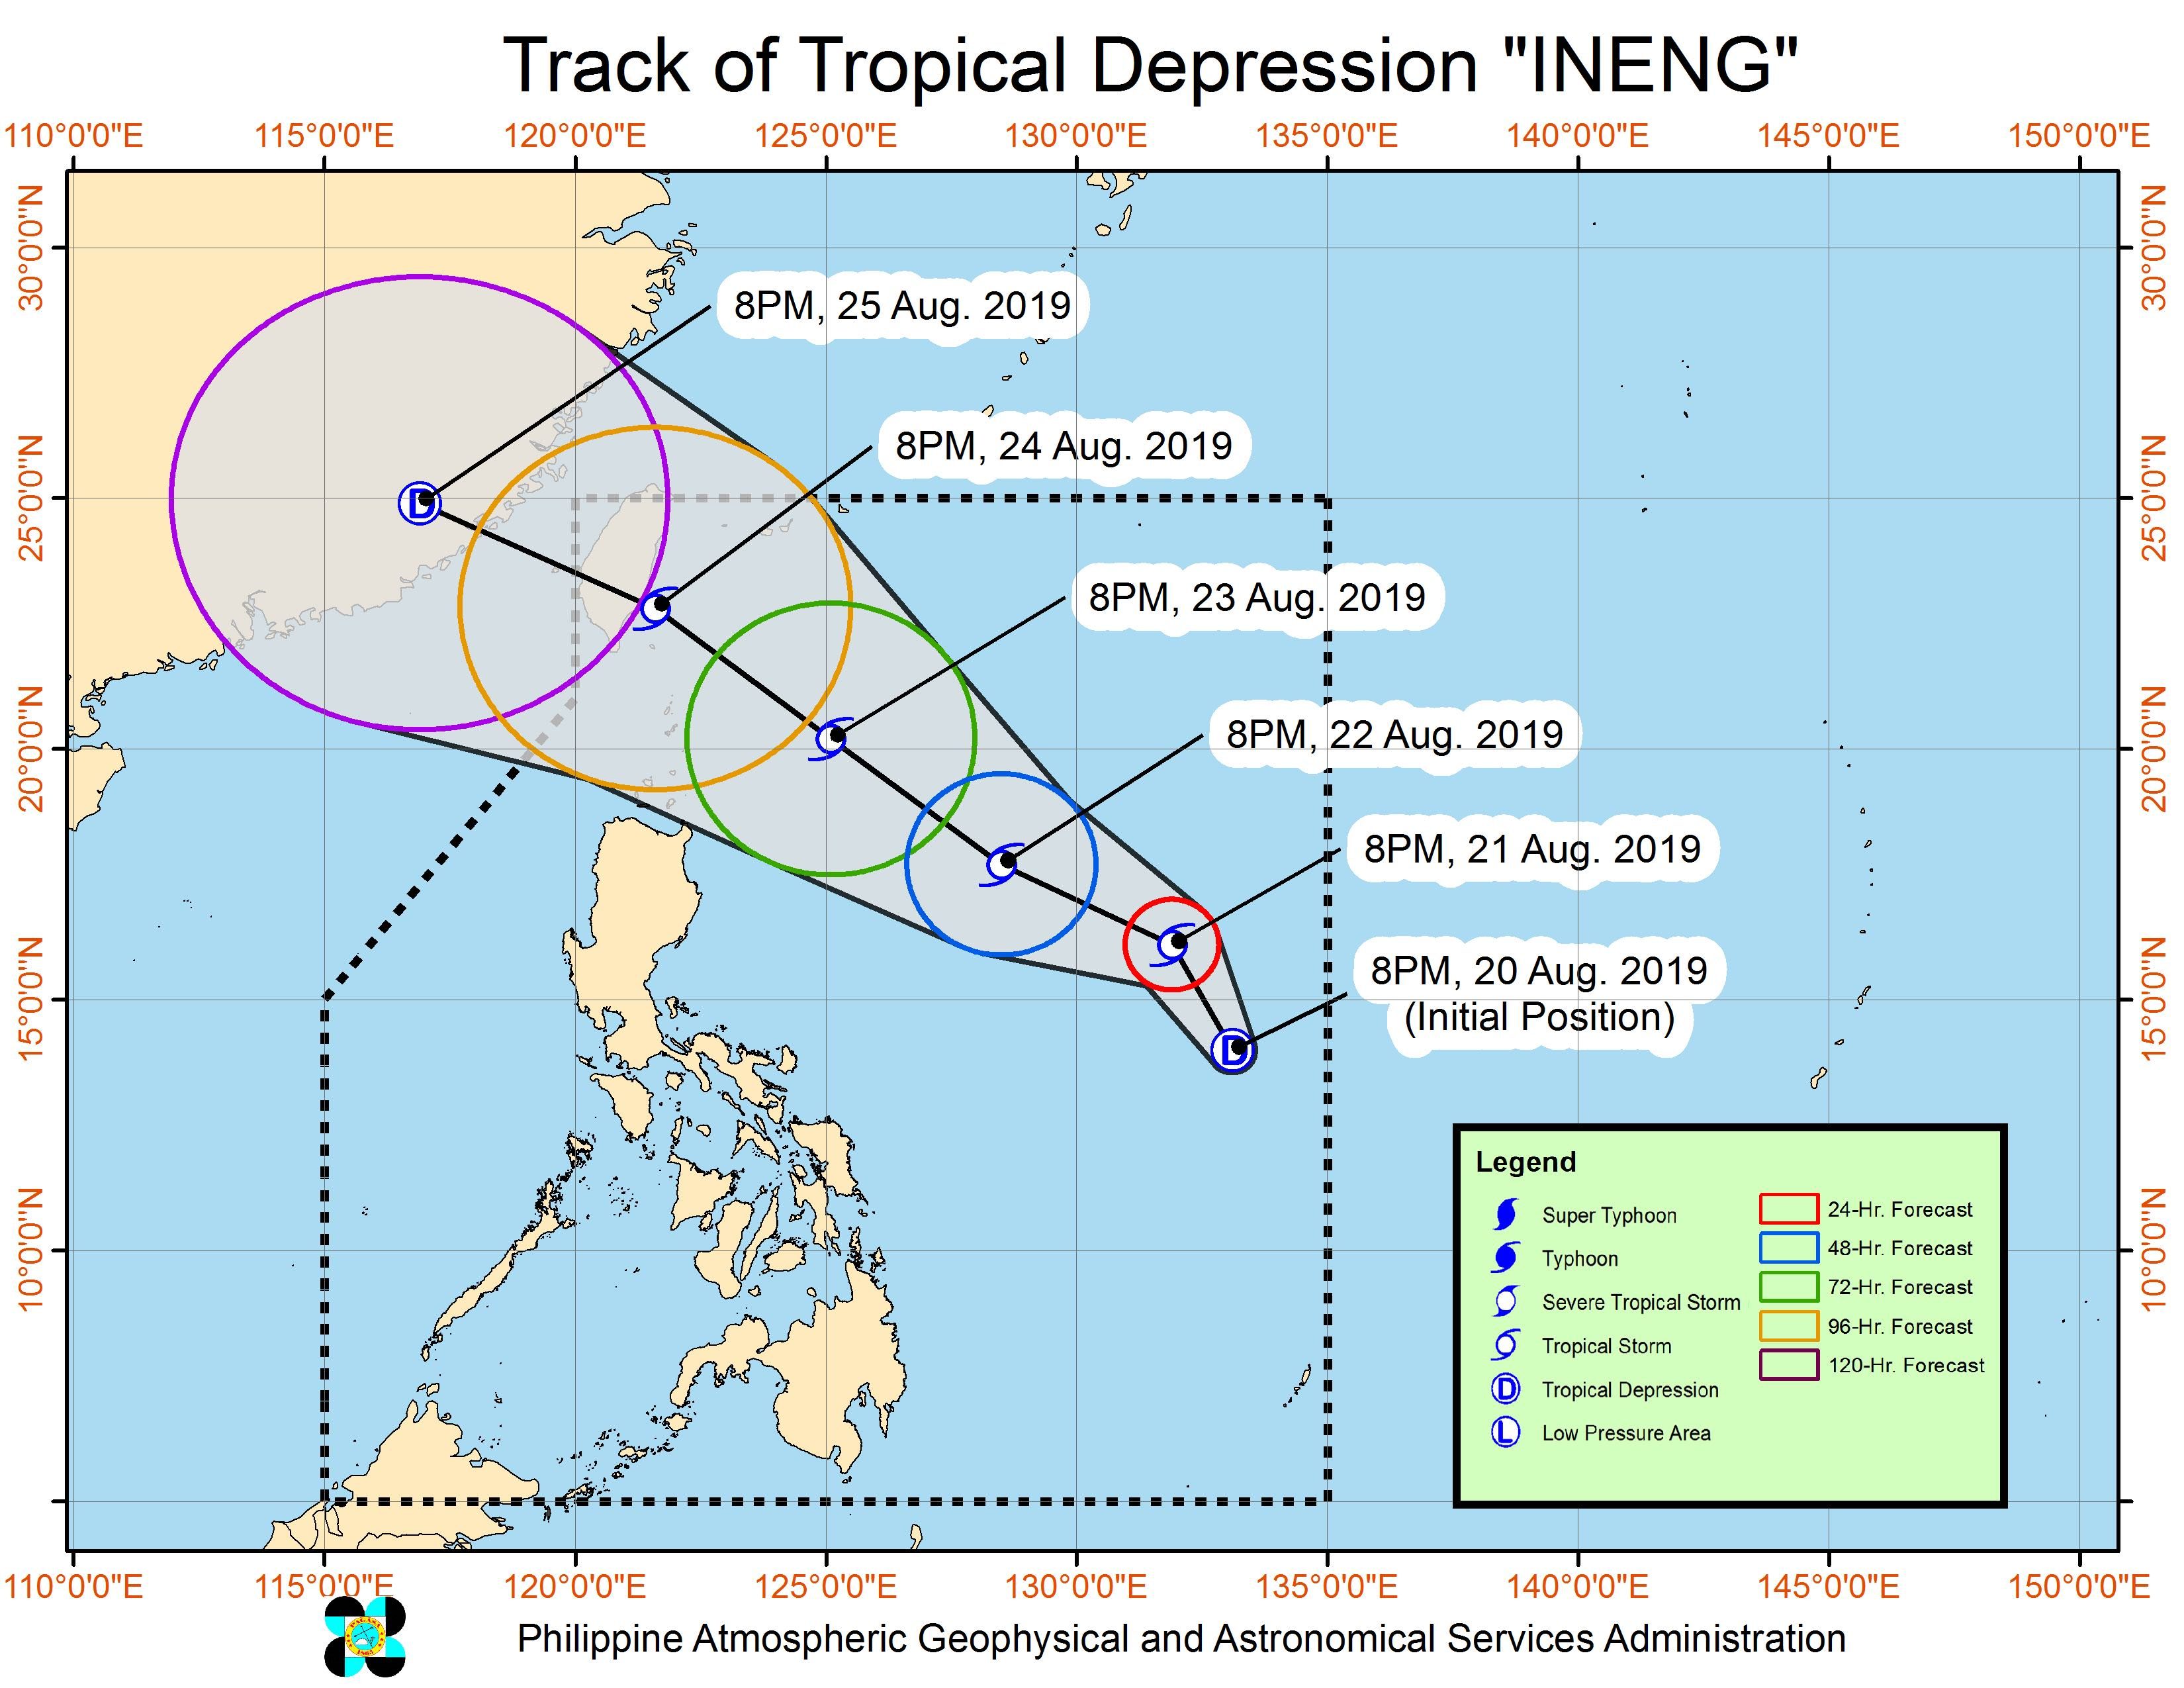 Forecast track of Tropical Depression Ineng as of August 20, 2019, 11 pm. Image from PAGASA 